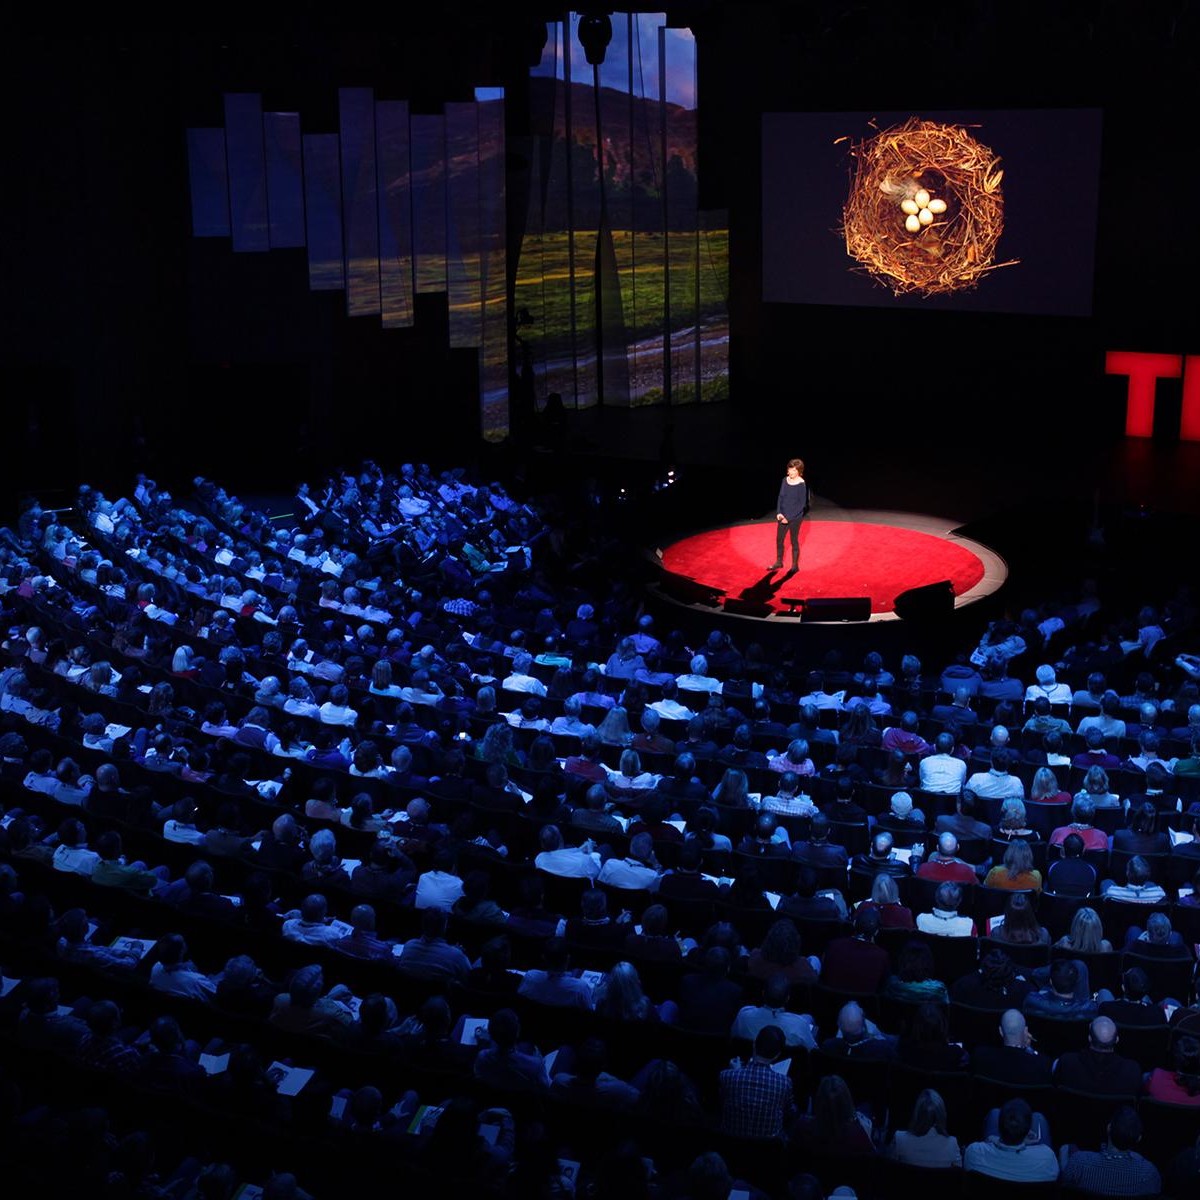 Ted Talk for Marketing